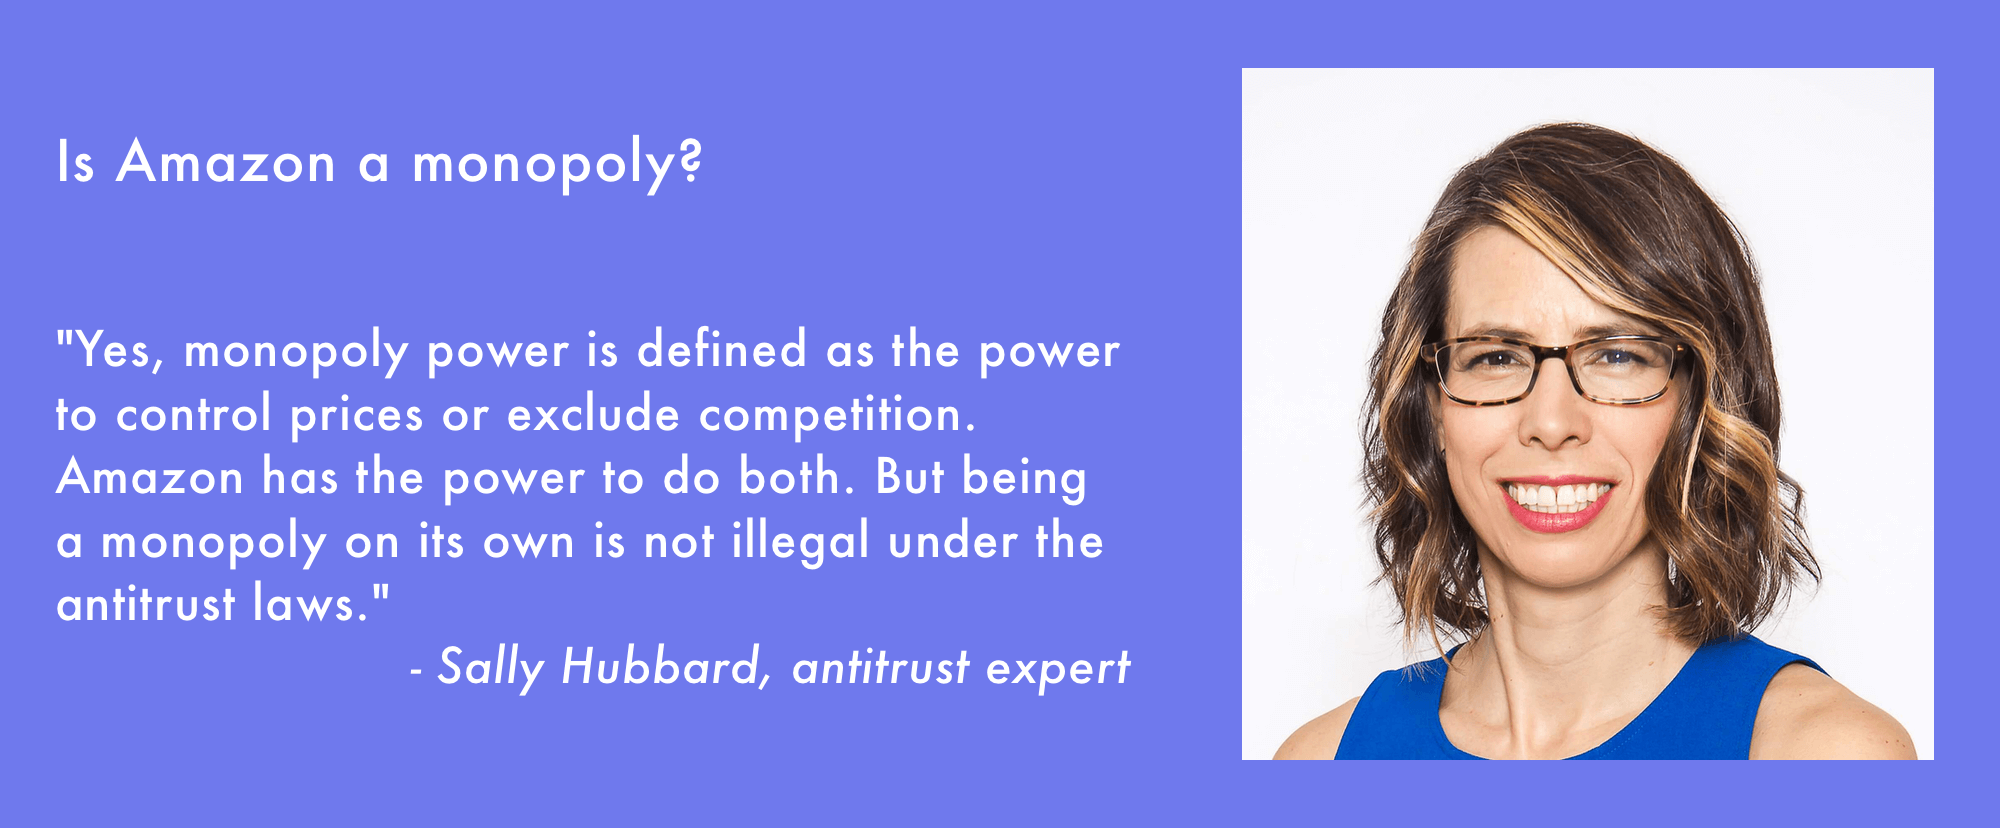 Sally Hubbard quote